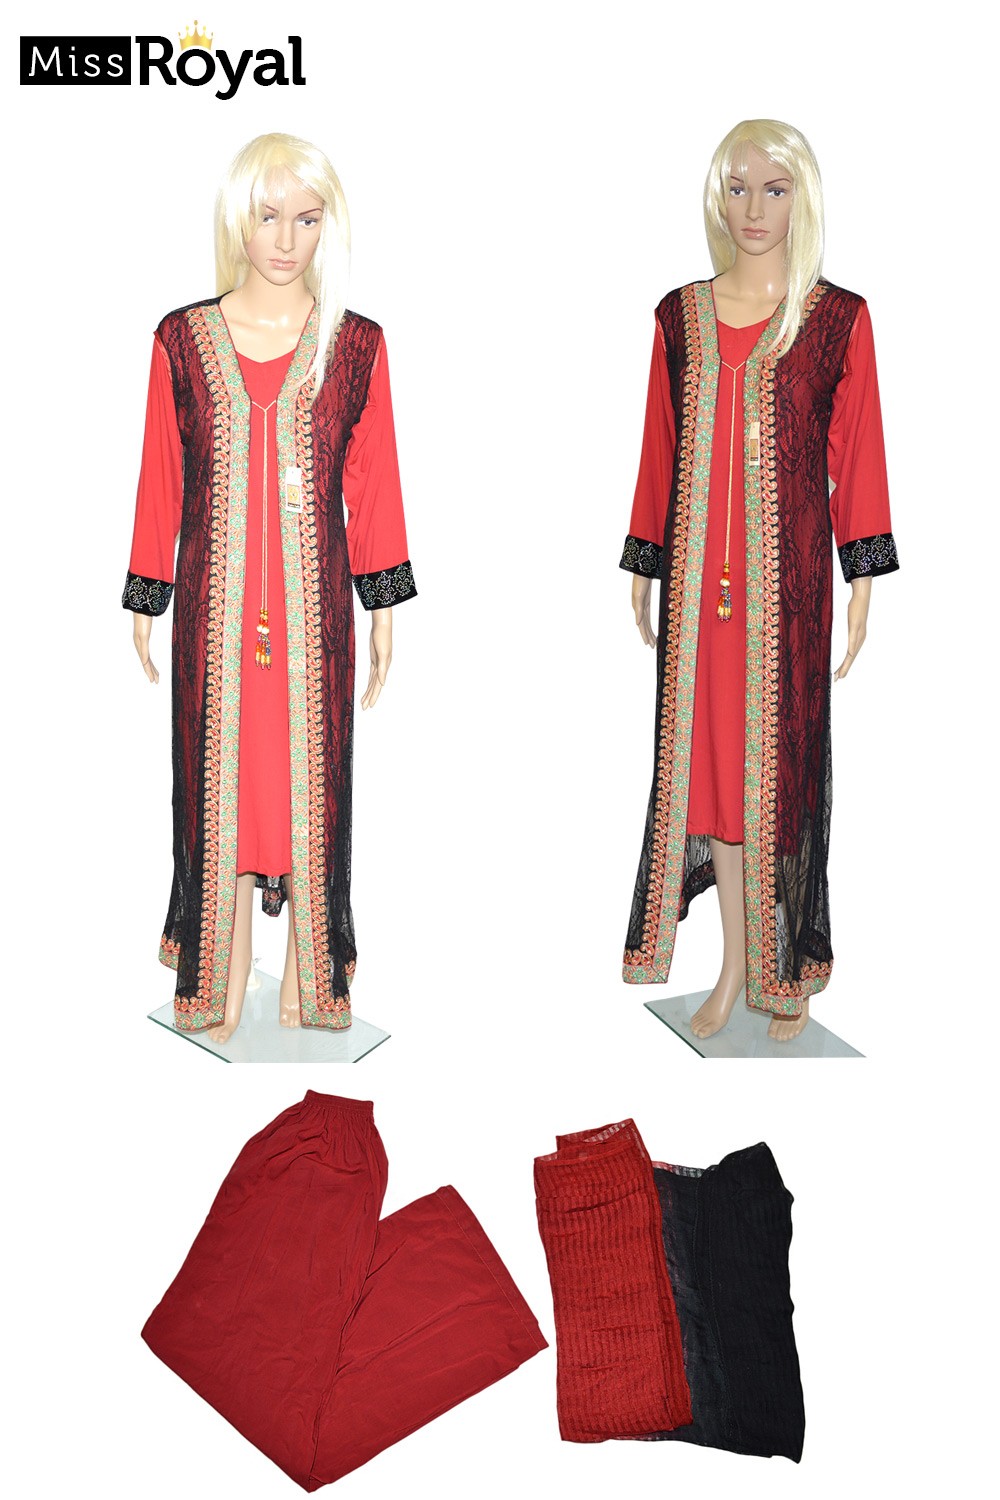 Quality Dress MissRoyal Asian stitched (Red/Black) dress in 4 pieces - Size Small - 1